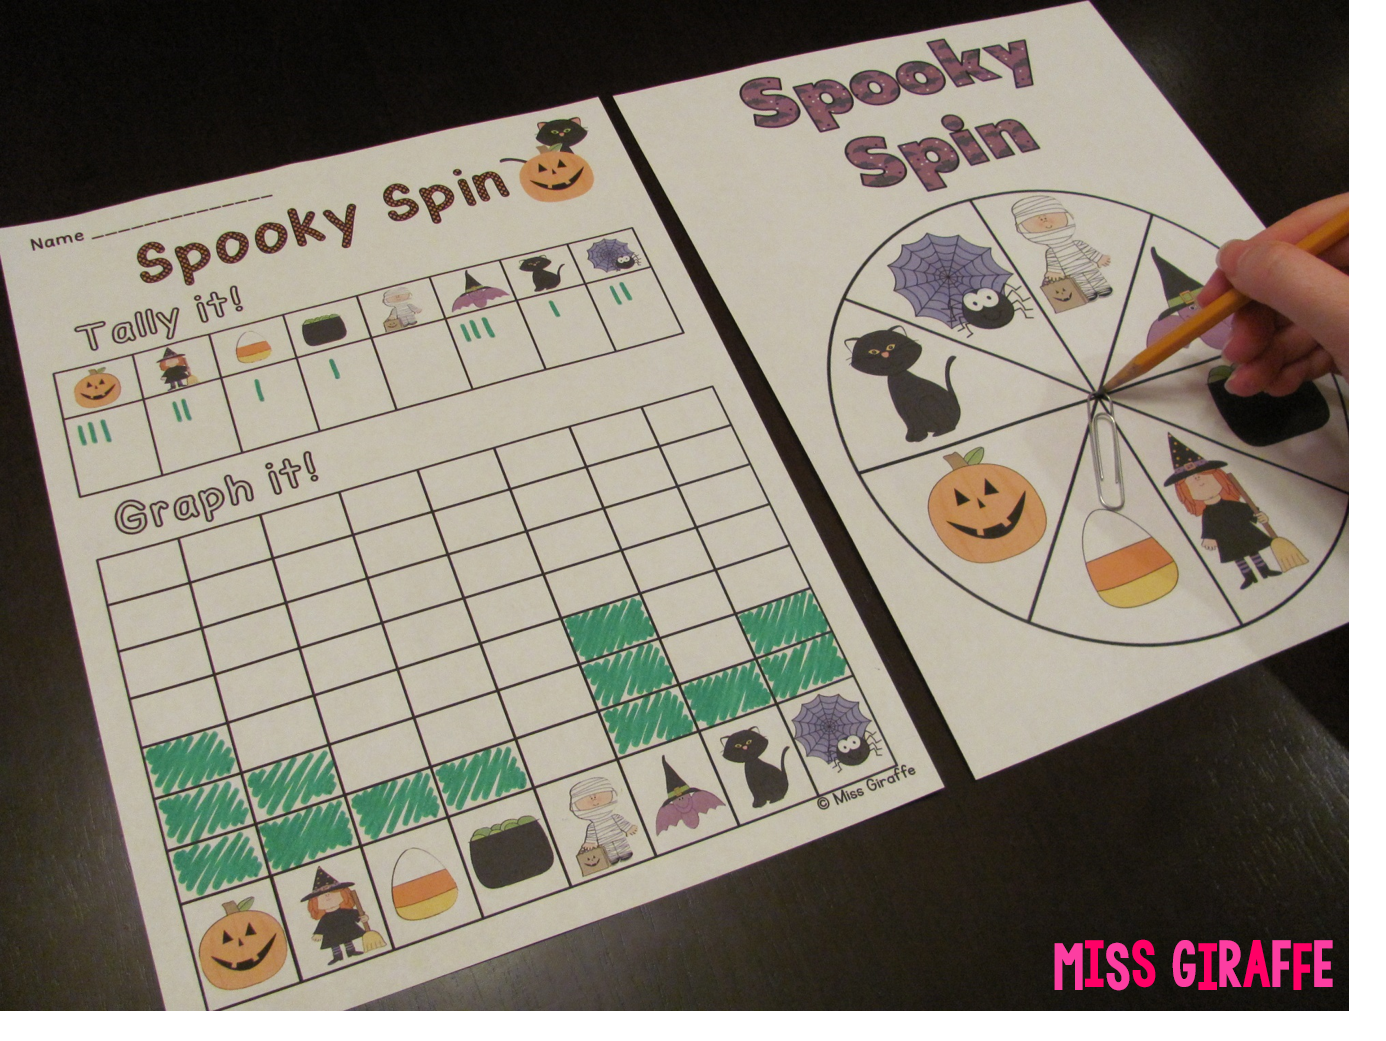 Spooky spin Halloween graphing math center for fun October math activities